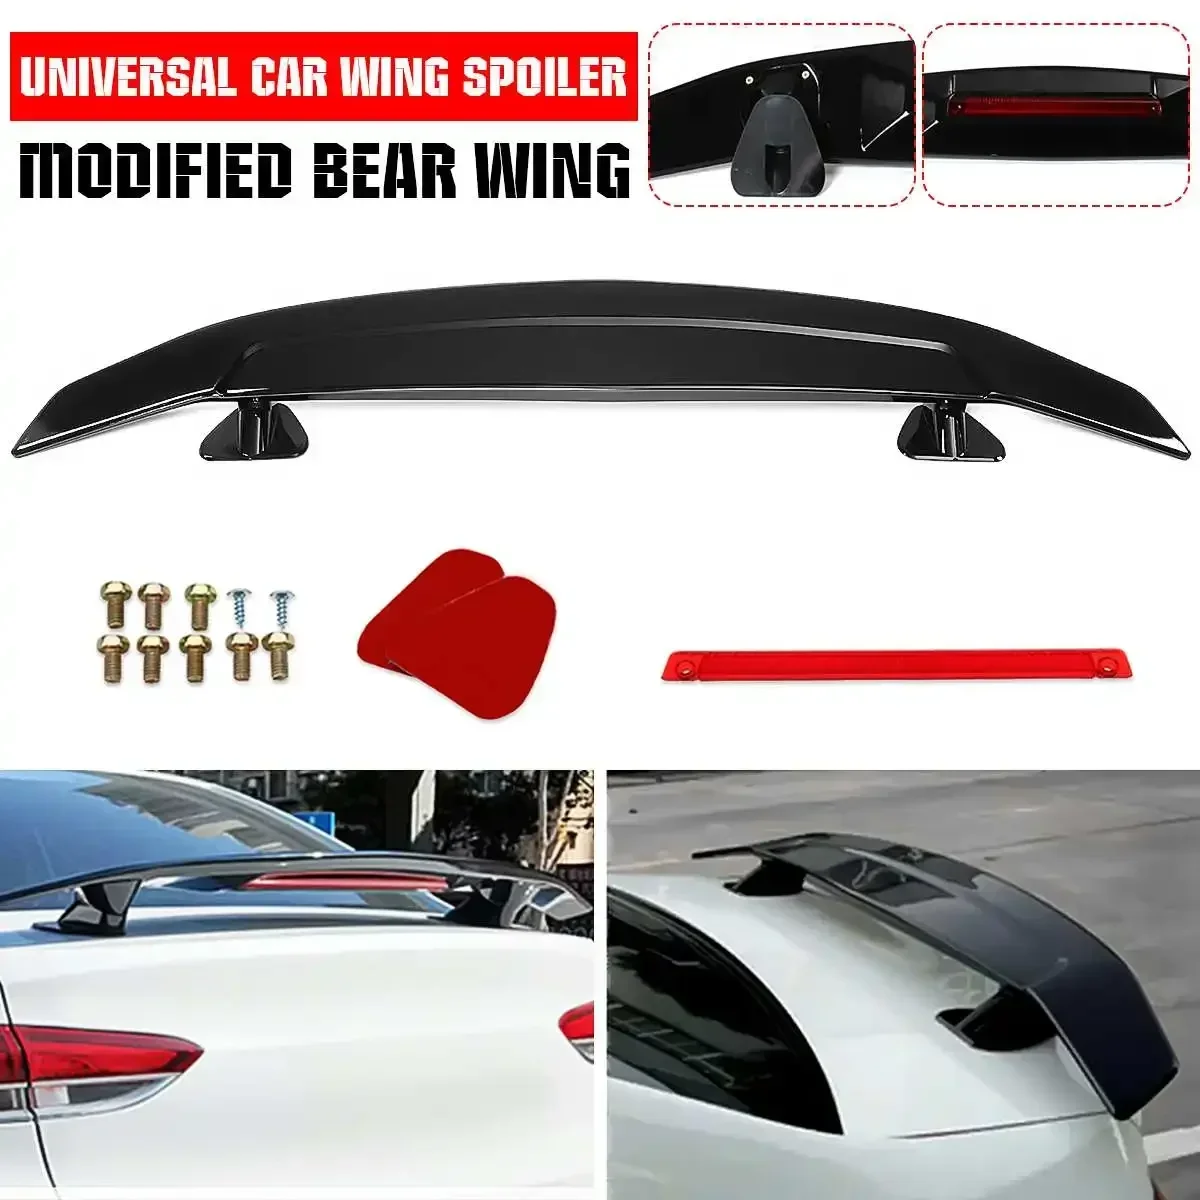 

Universal GT Racing Sport Rear Trunk Boot Car Spoiler Ducktail Lip Wing For Mostly Sedan Car For Nissan GTR For Mustang Body Kit